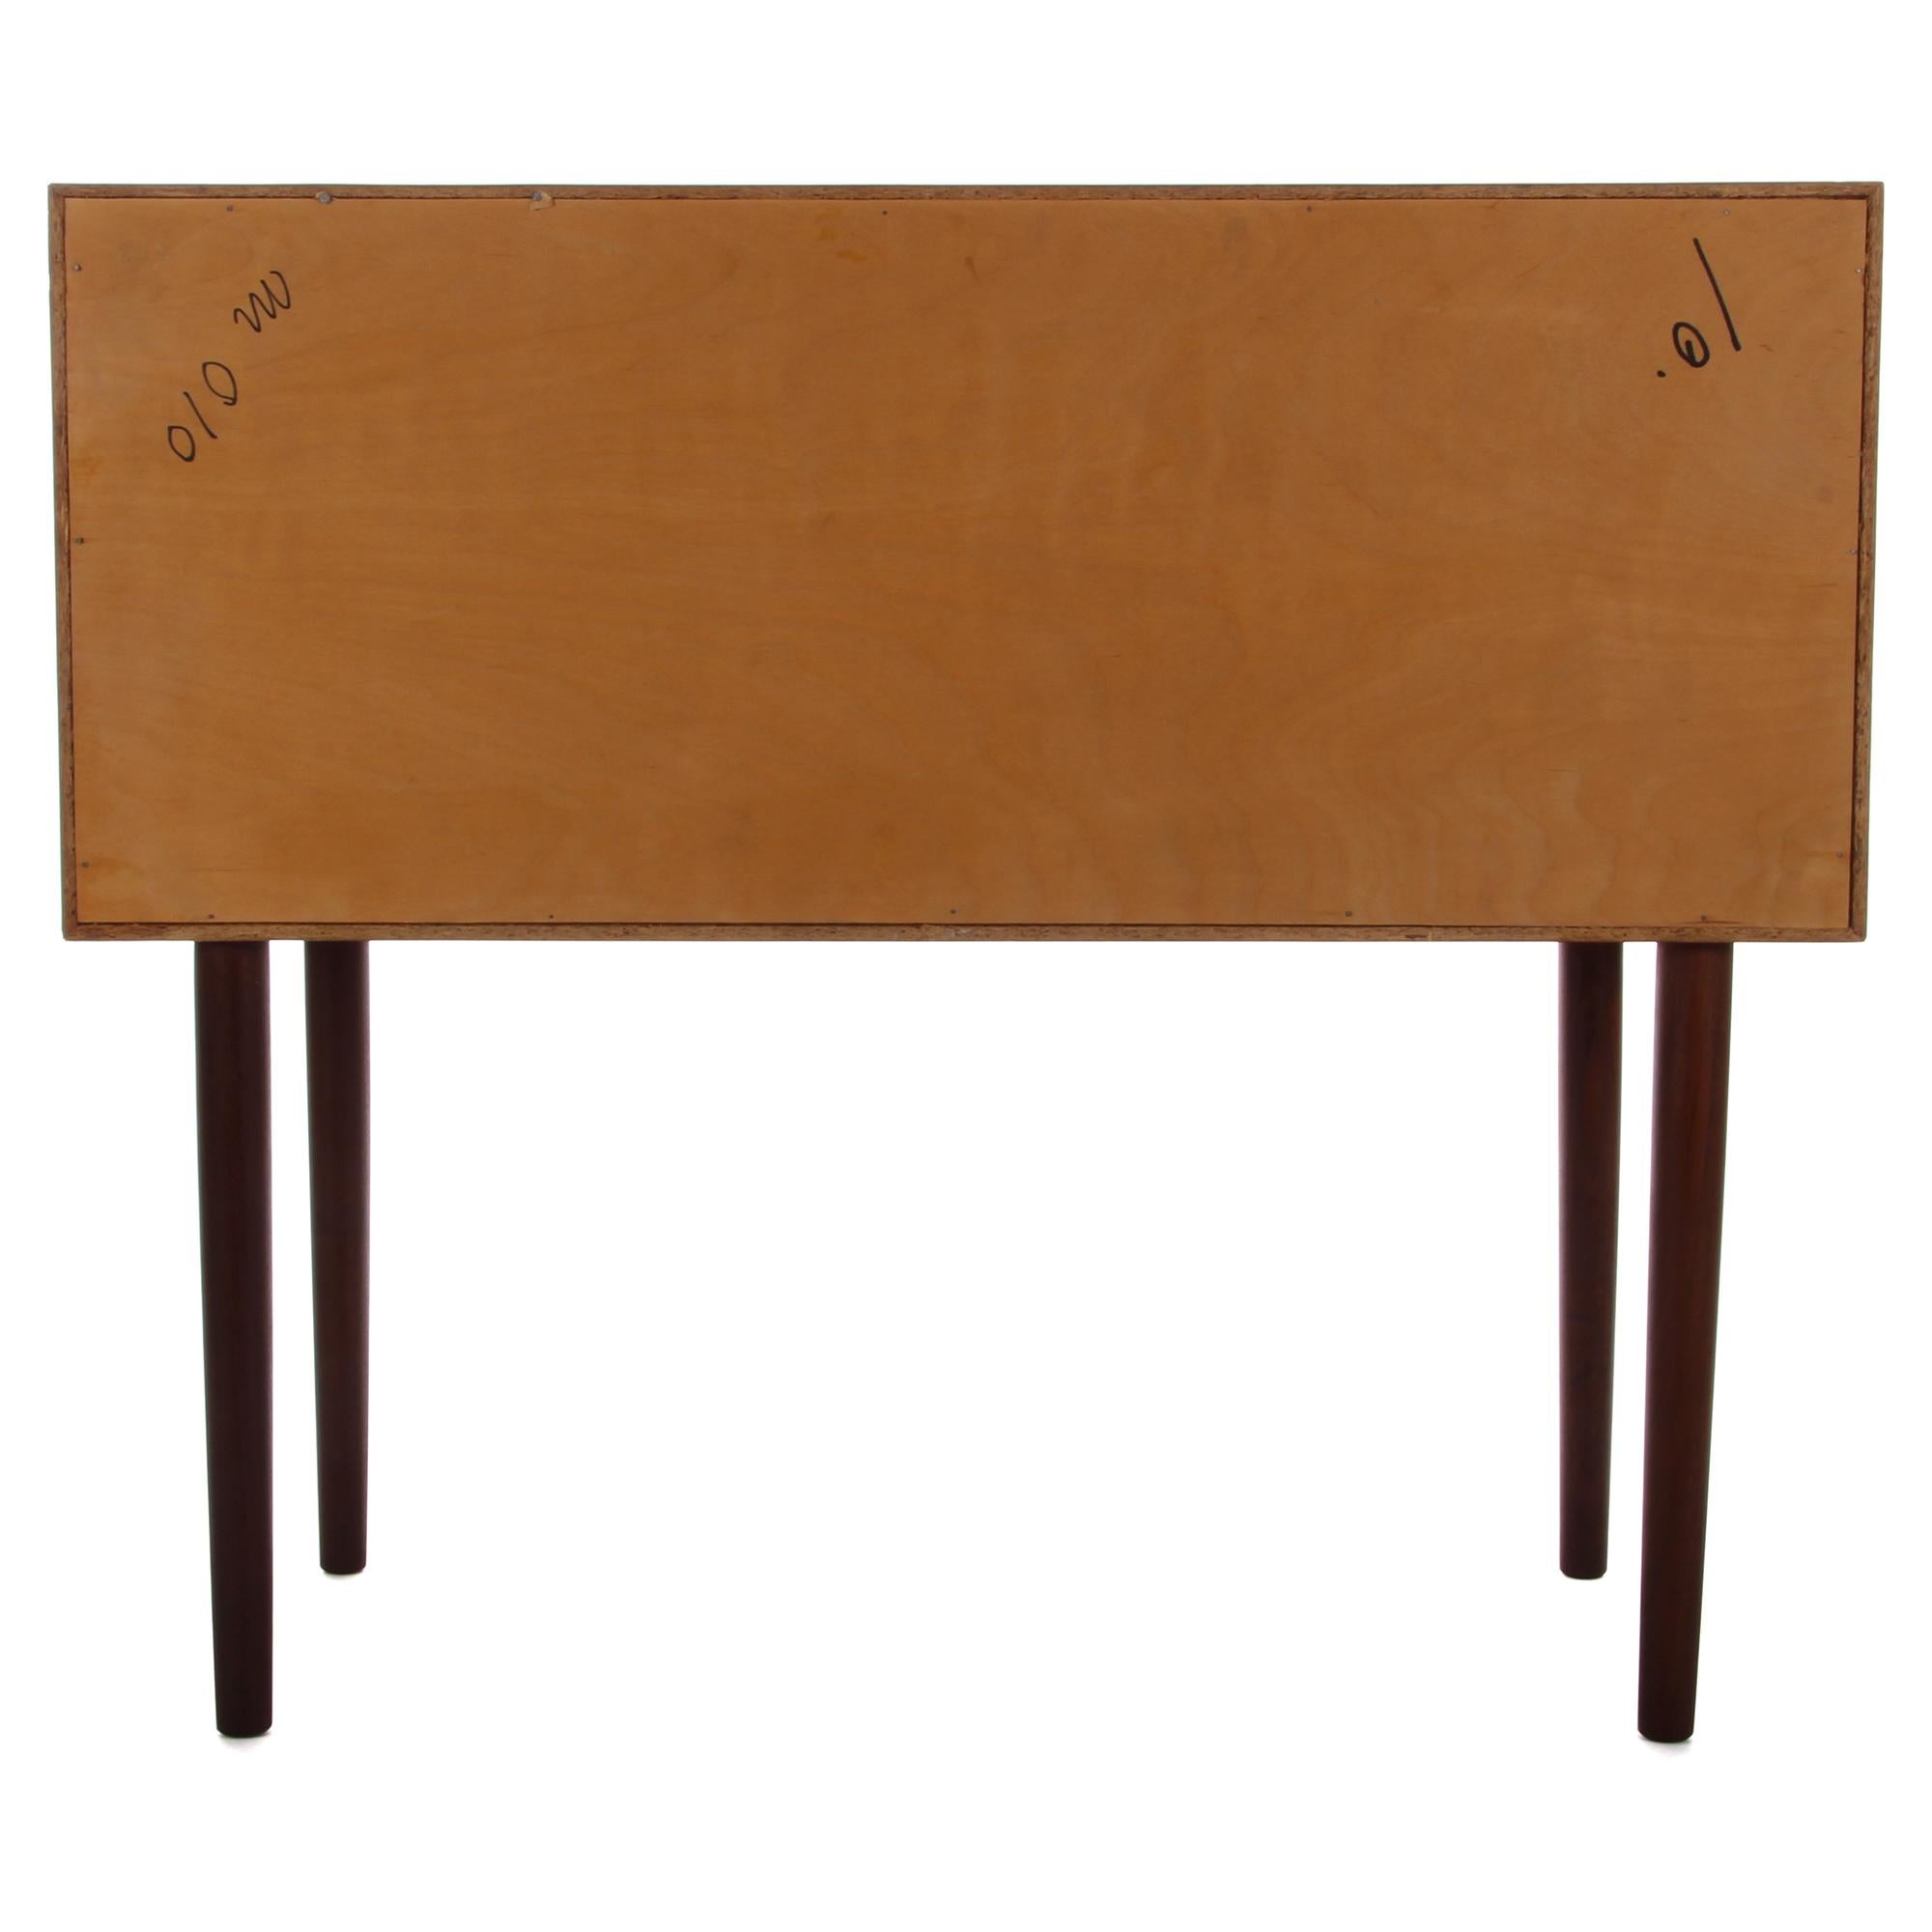 Teak Chest of Drawers from the 1960s, Danish Midcentury Dresser with Drawers 1